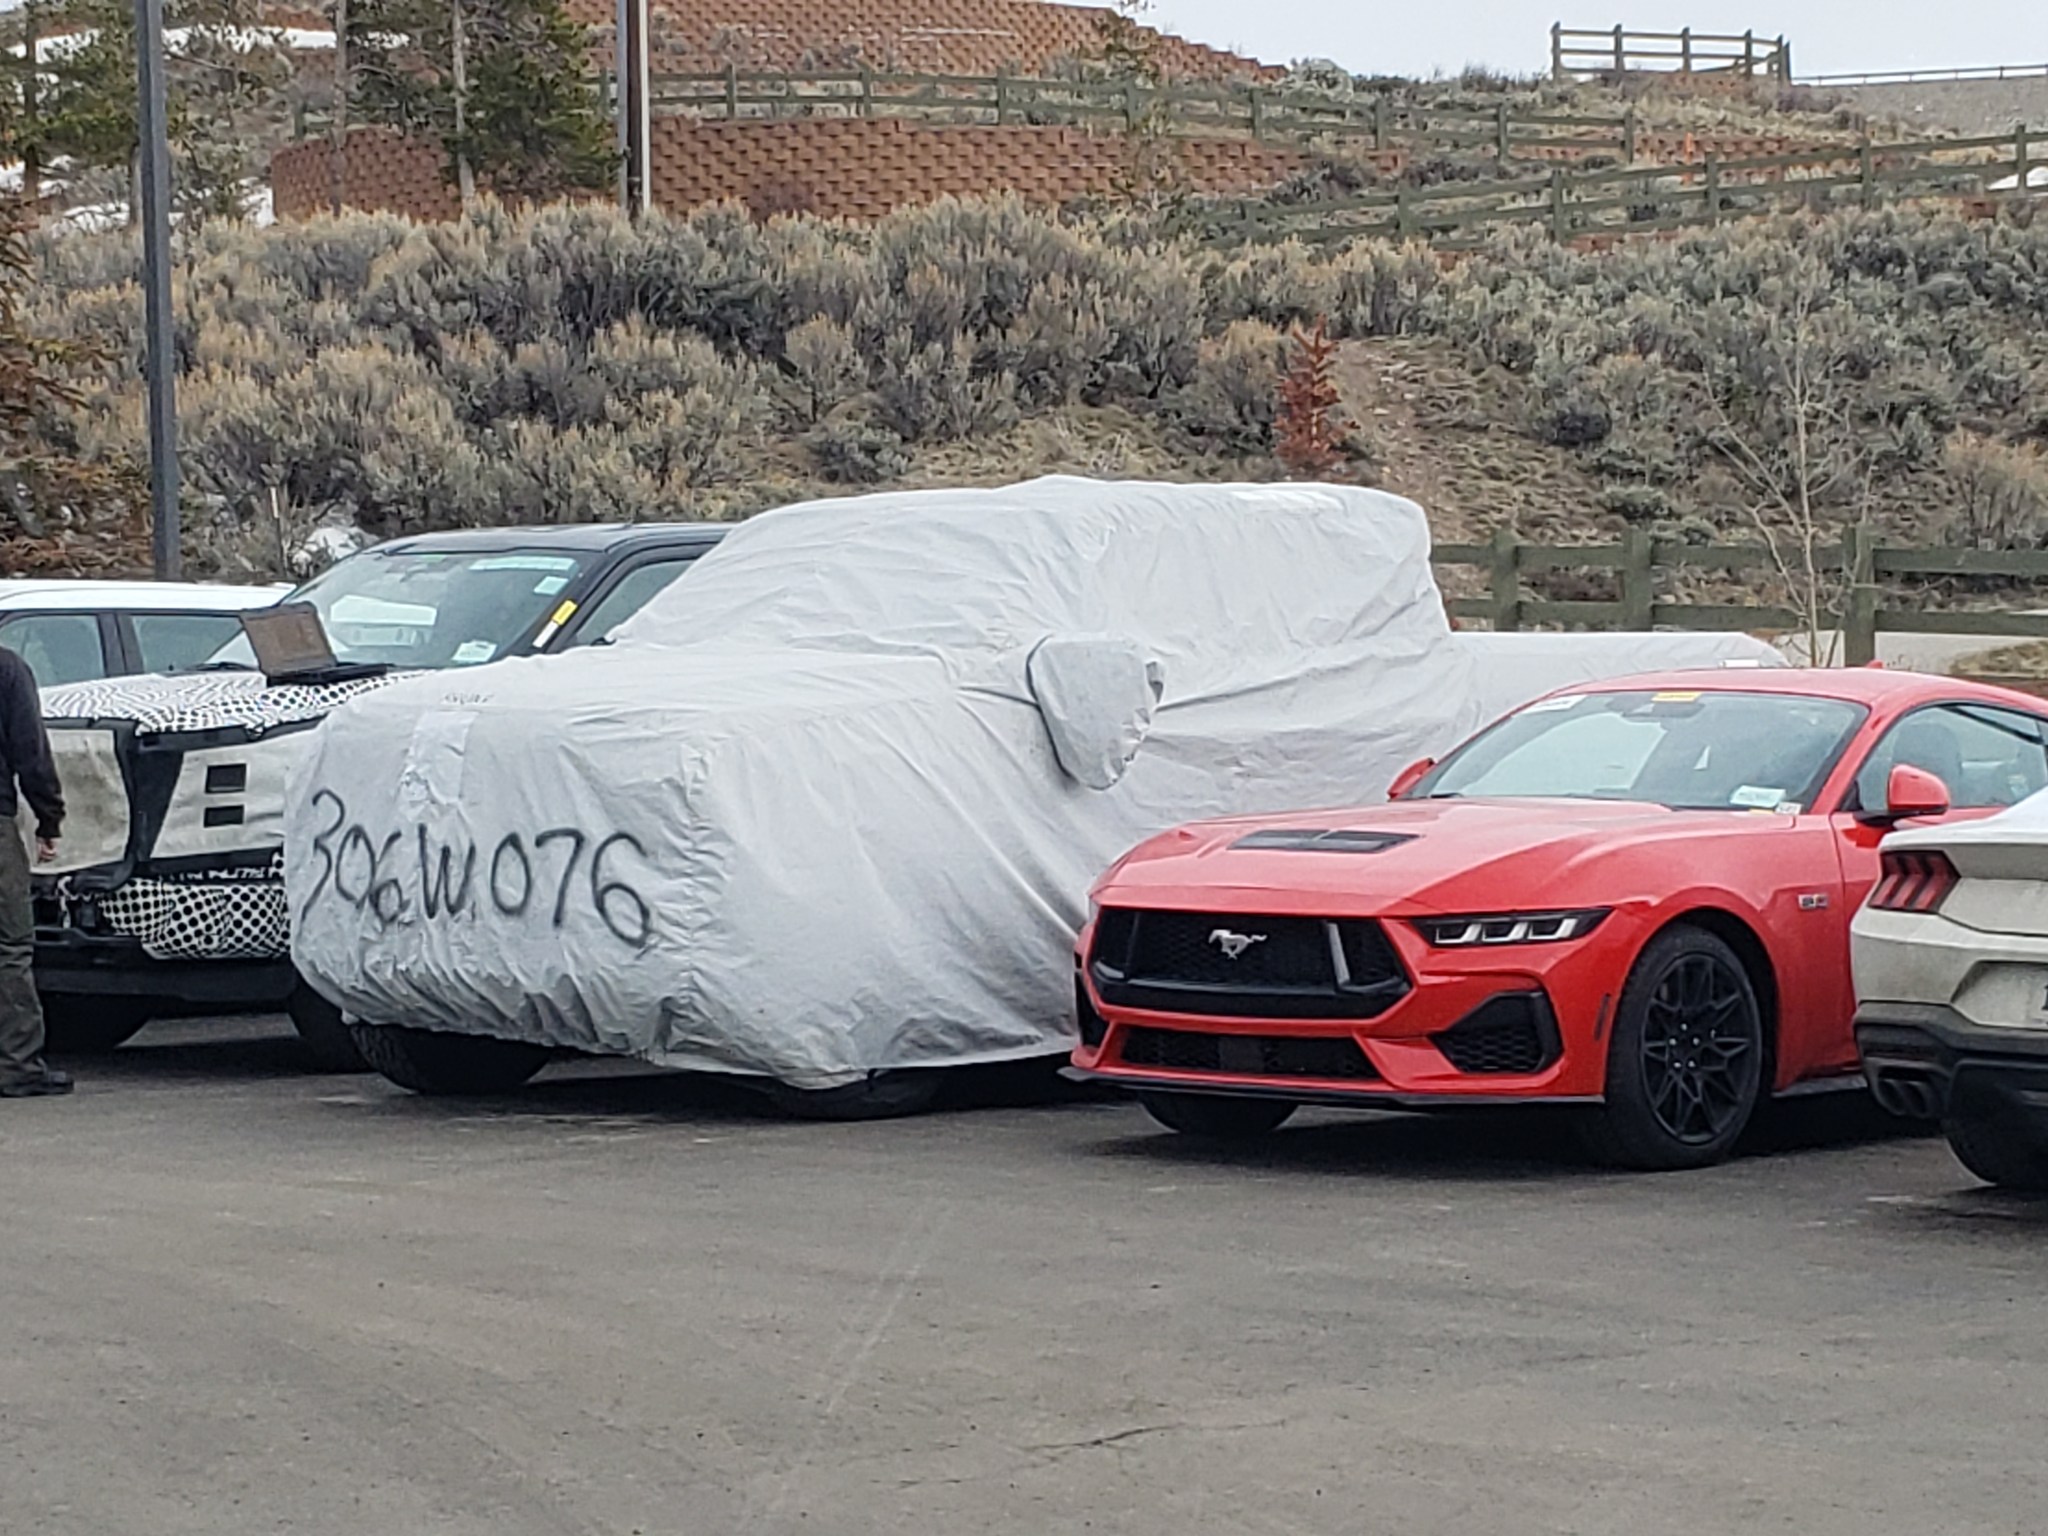 S650 Mustang S650 Mustang global-market prototypes testing in Colorado S650 Camo 2